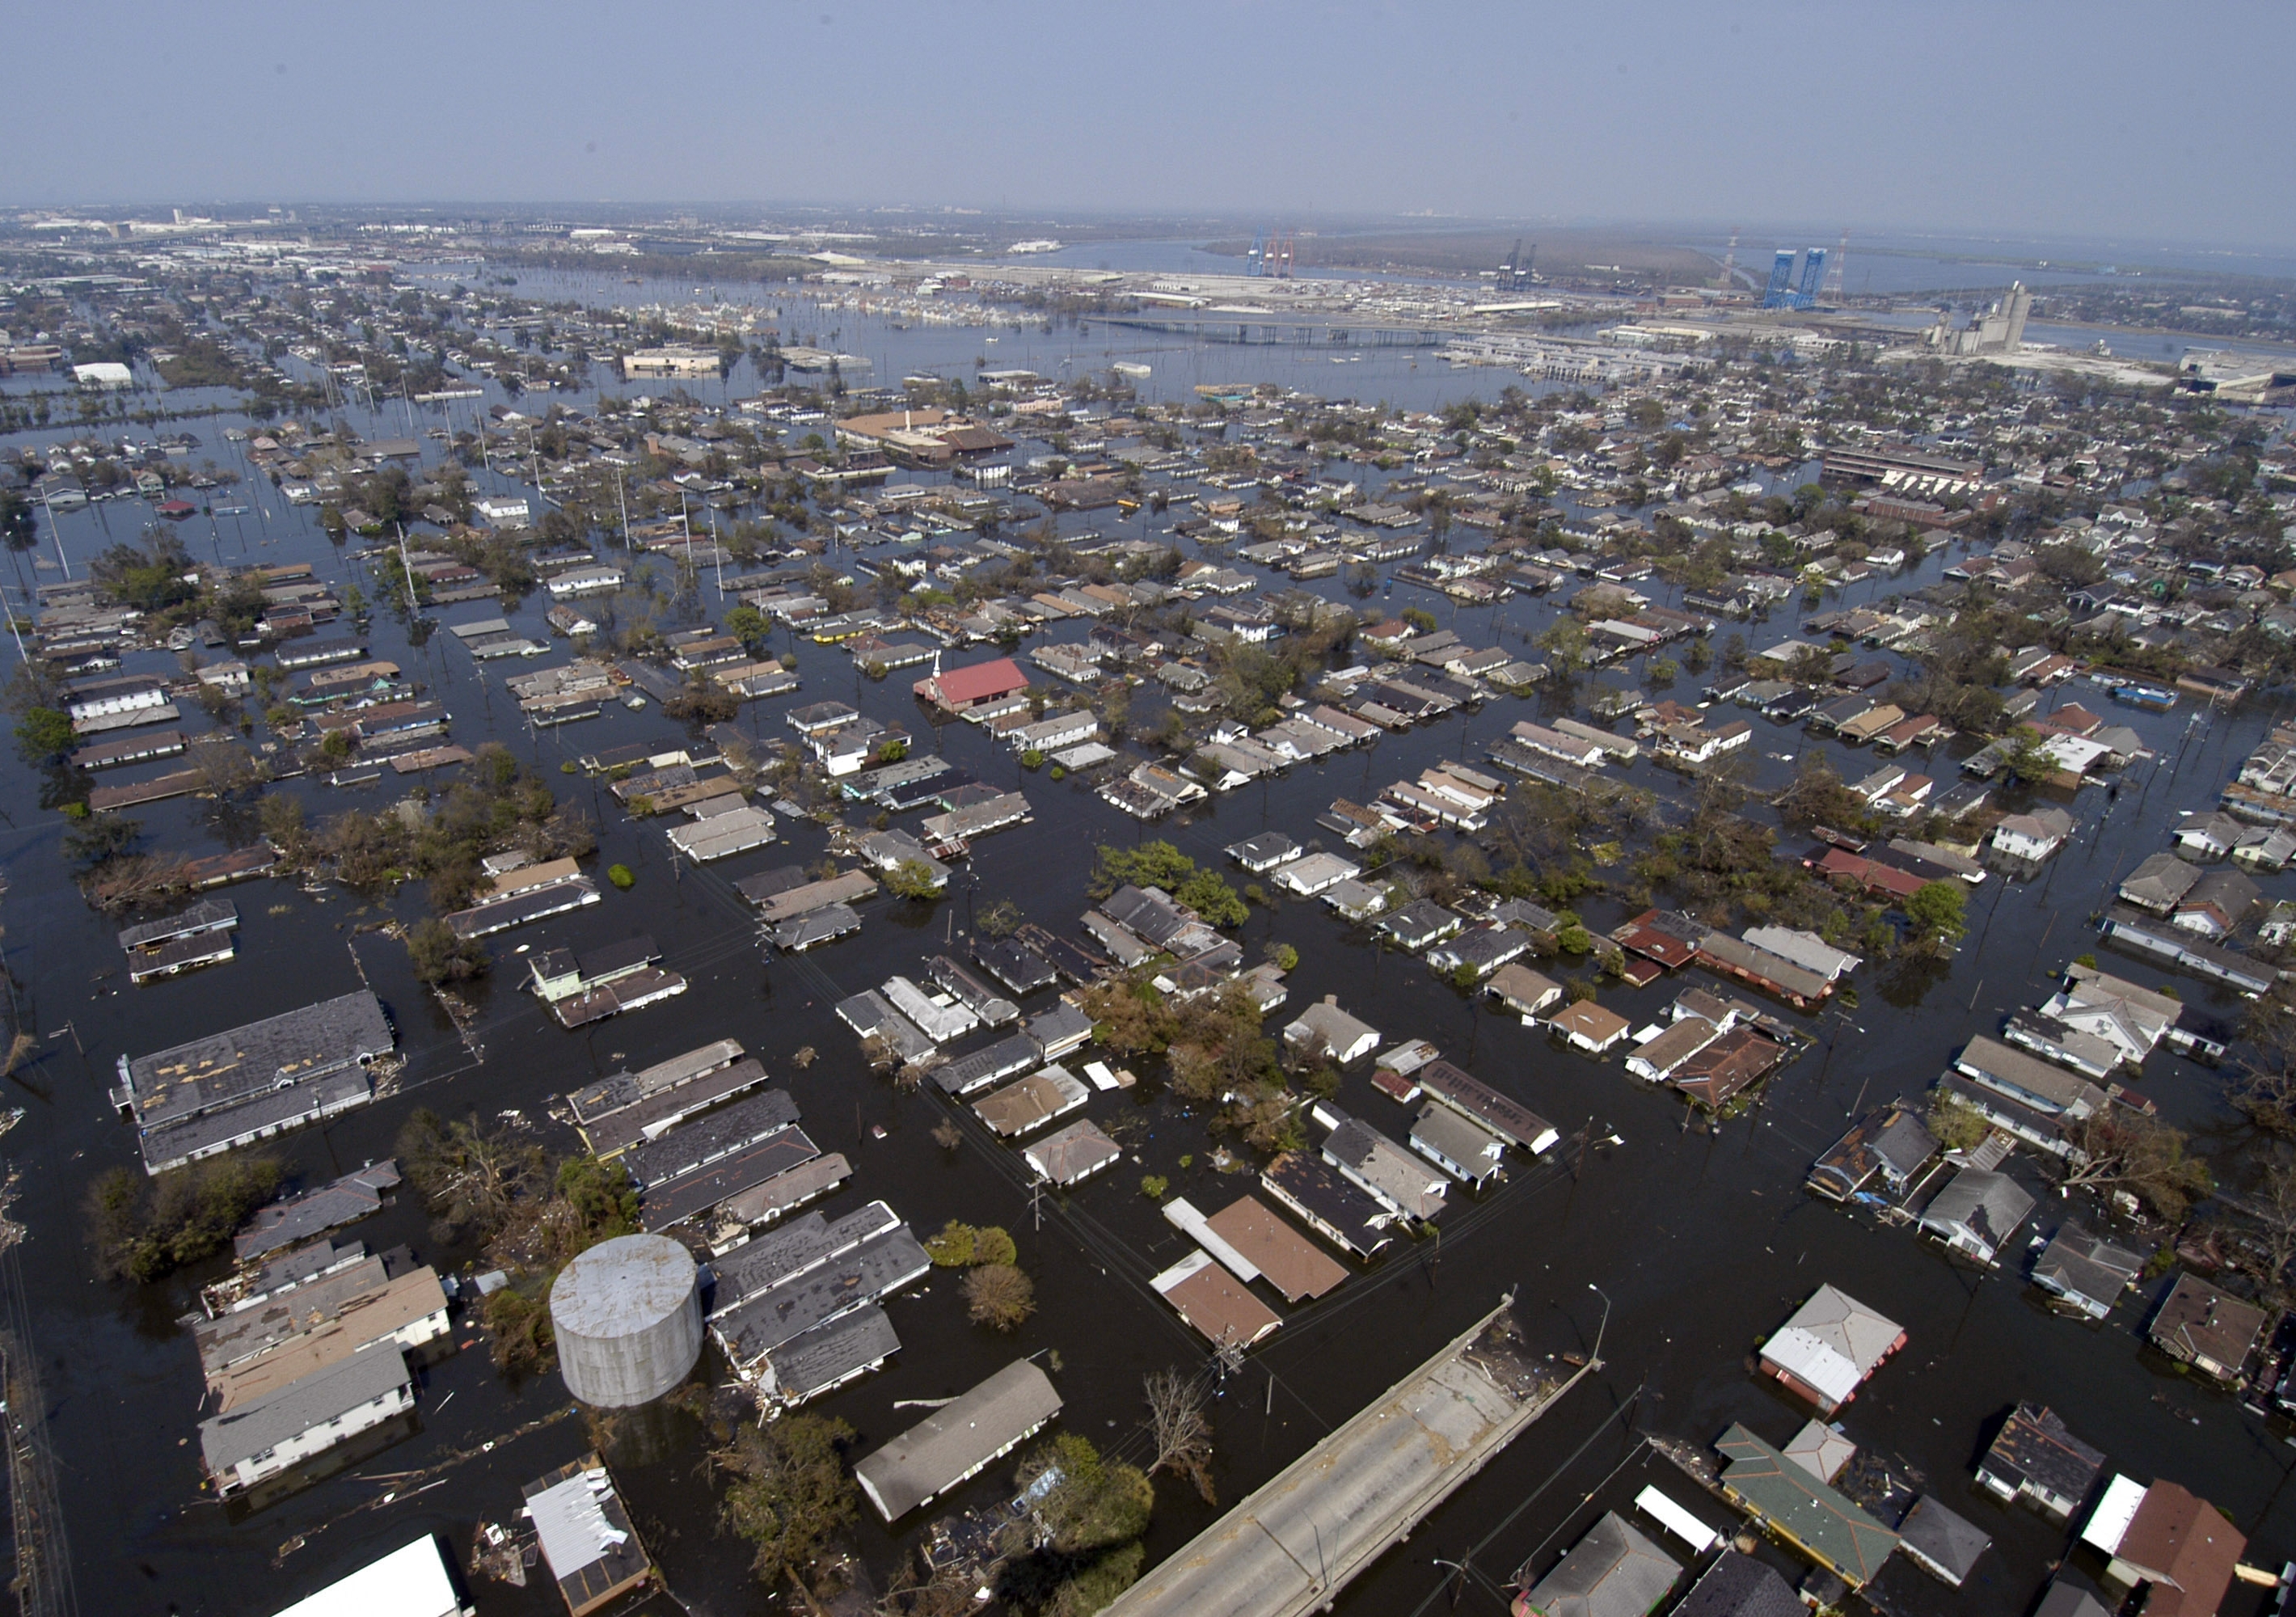 New Orleans four days after Hurricane Katrina in 2005 ... climate change is bringing more rainfall to urban areas and leaving less water in rural and farming areas. Photo: US Navy